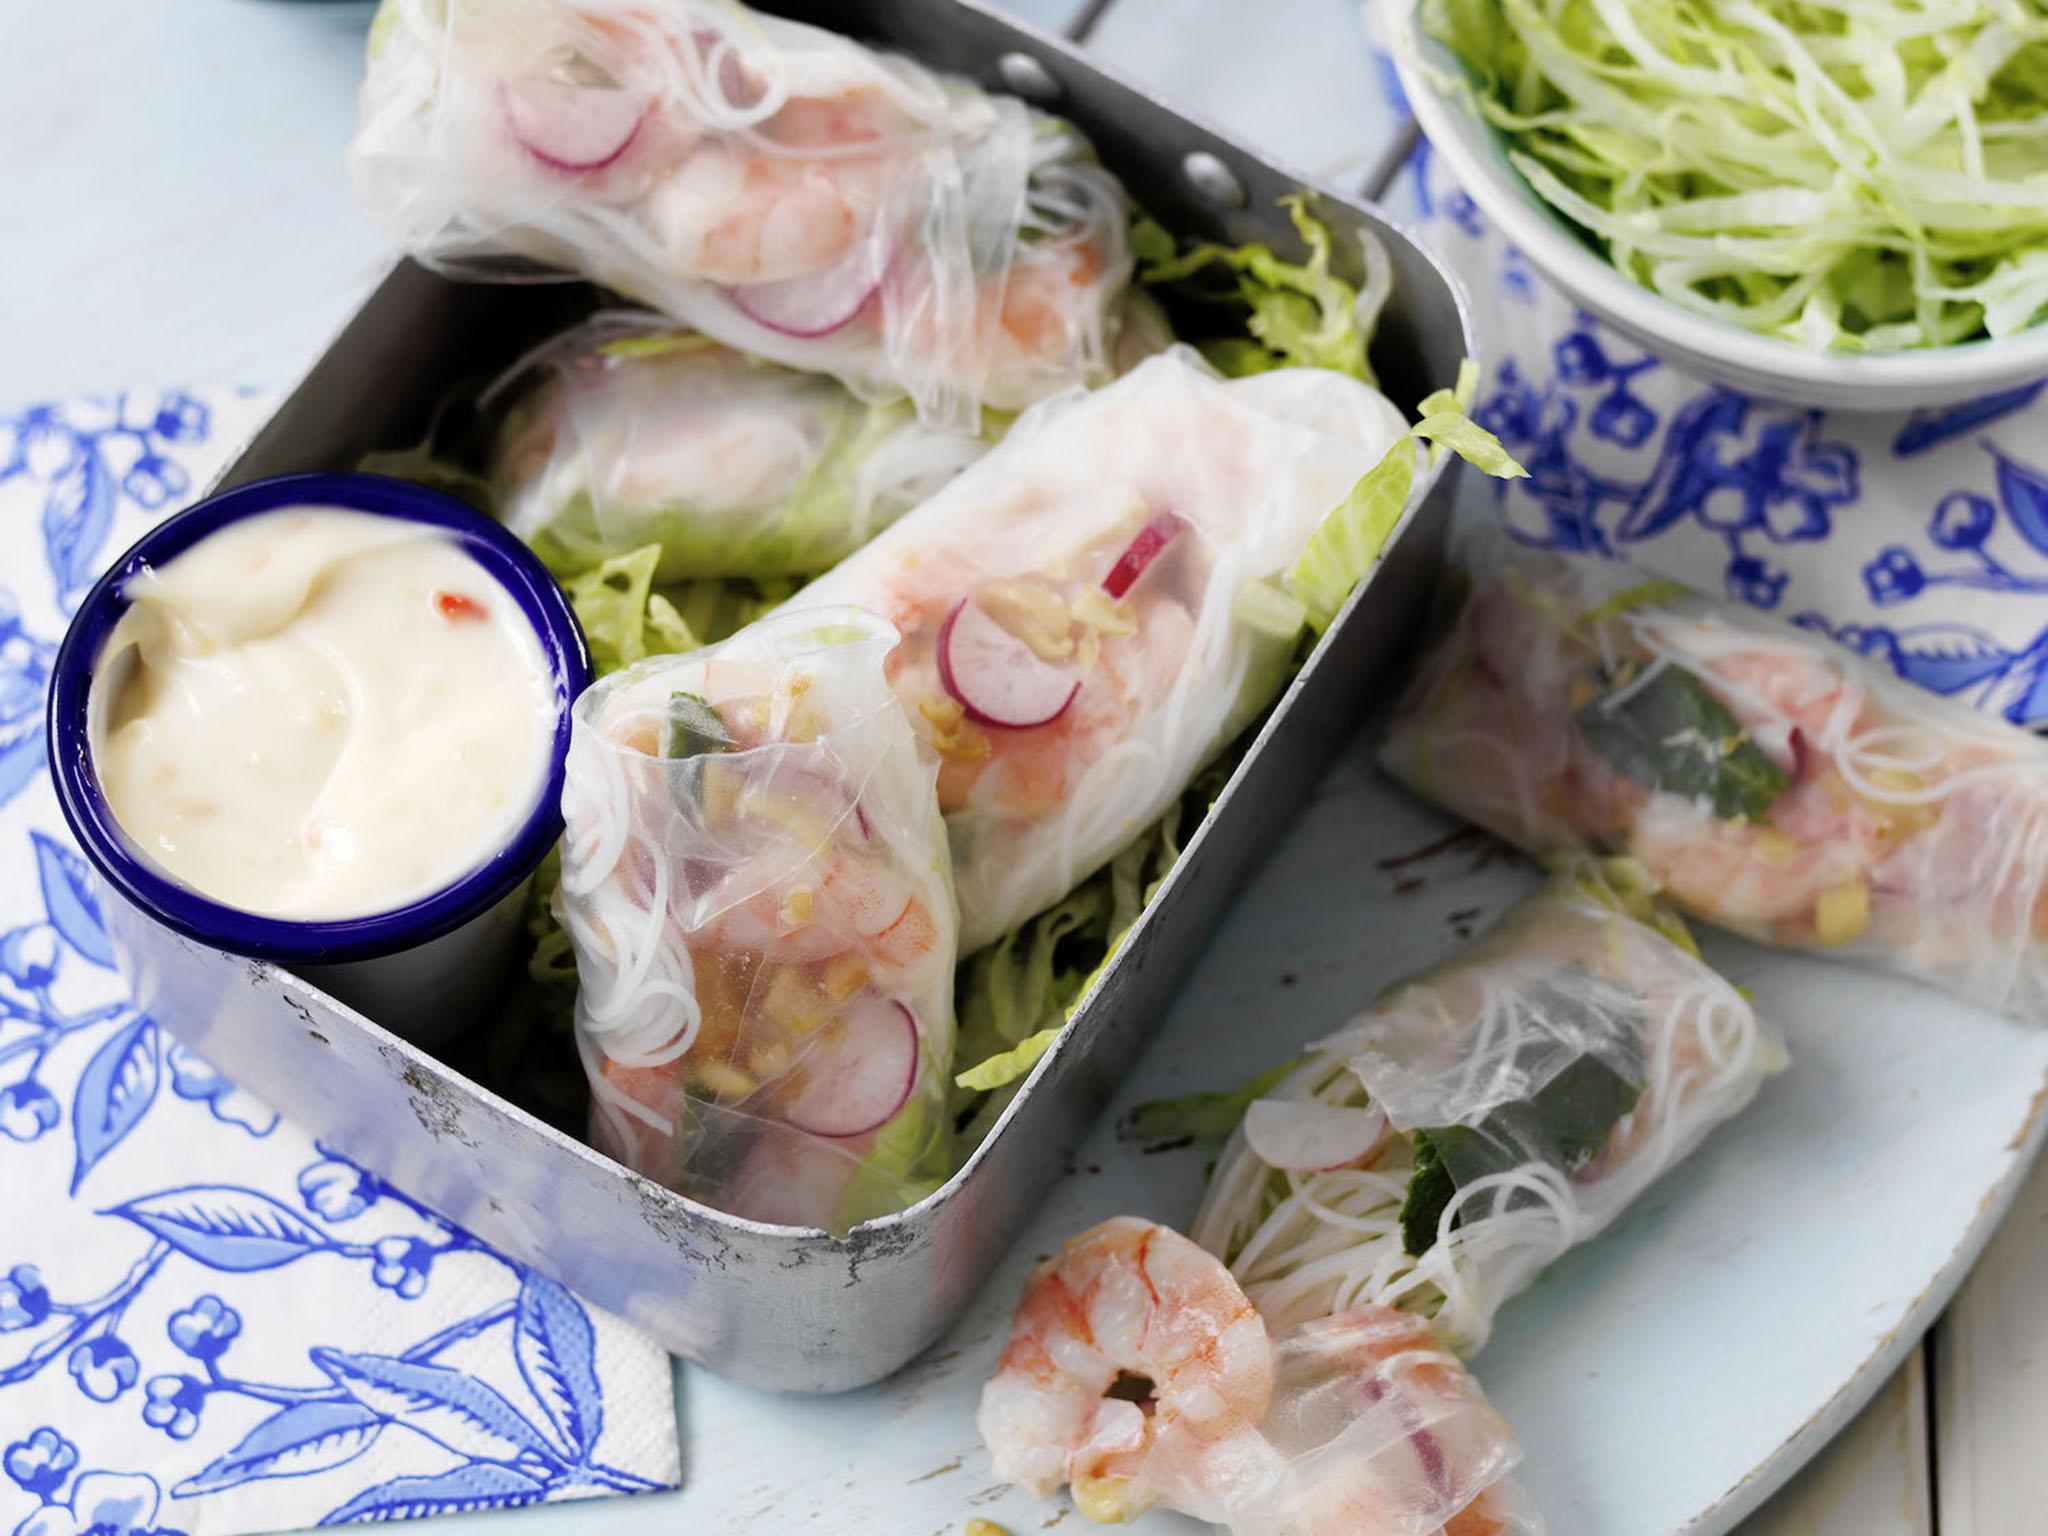 Vietnamese-style rolls are crunchy and fresh tasting and easy to eat with one hand